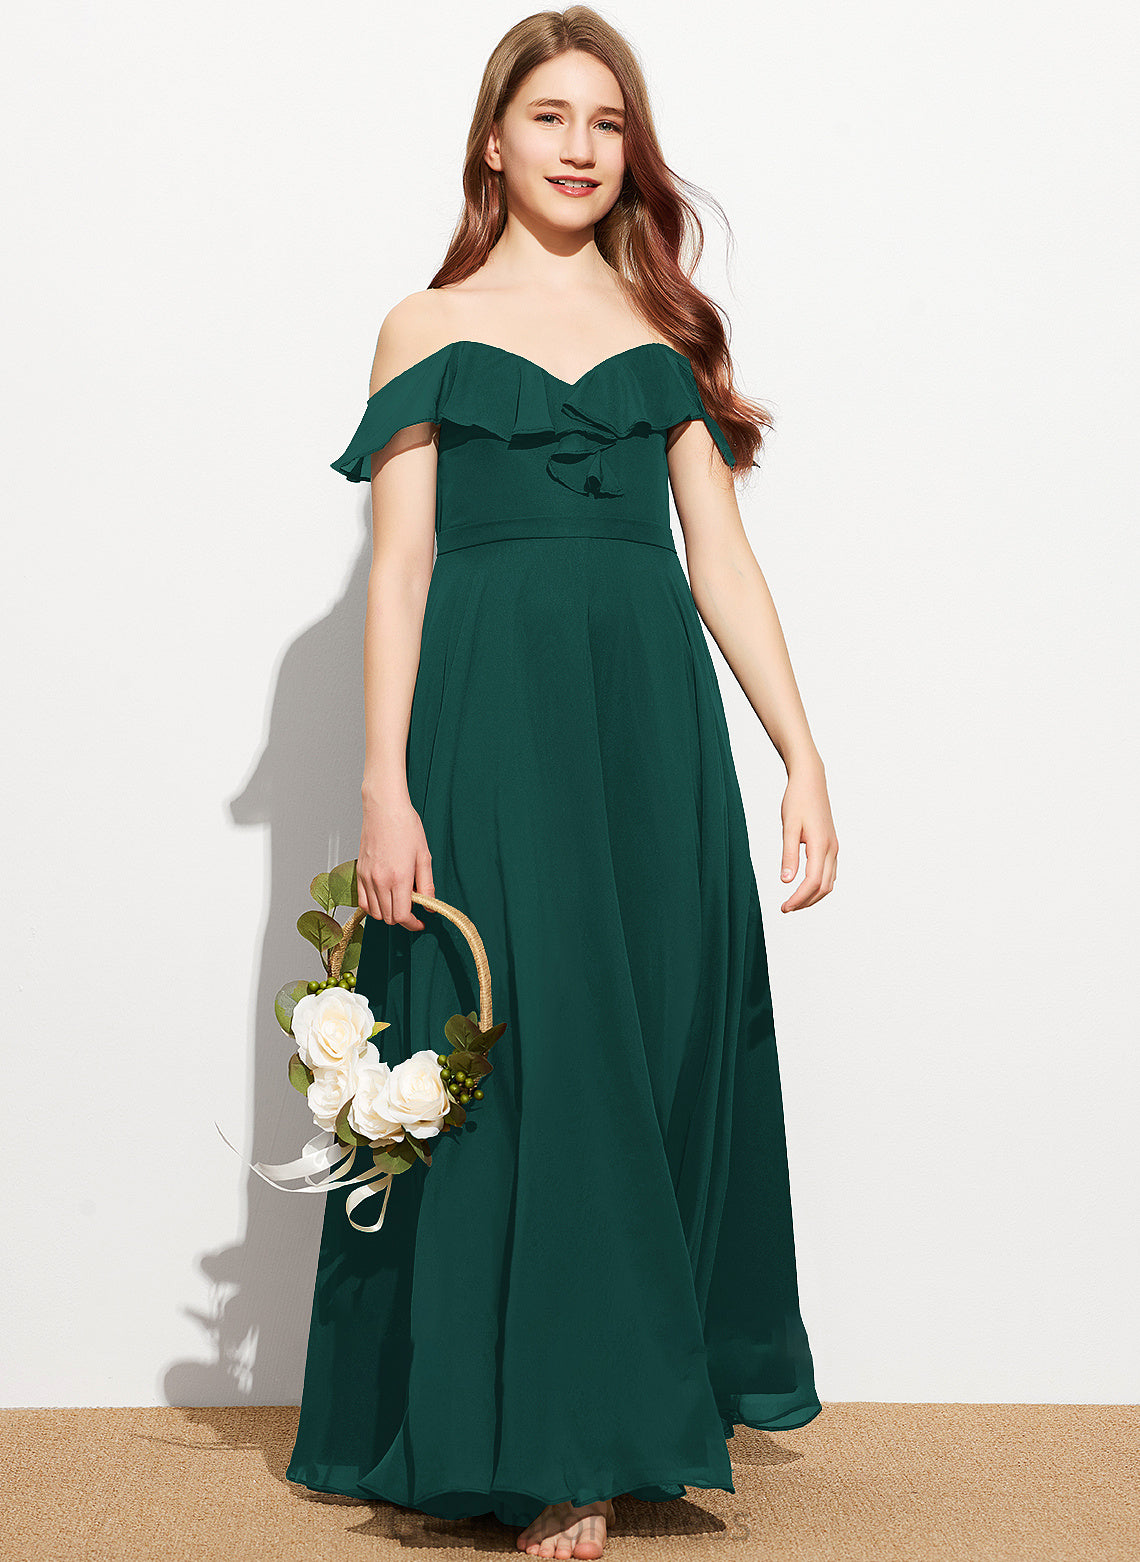 Ruffles Junior Bridesmaid Dresses Chiffon Cascading With Floor-Length Anabella Off-the-Shoulder A-Line